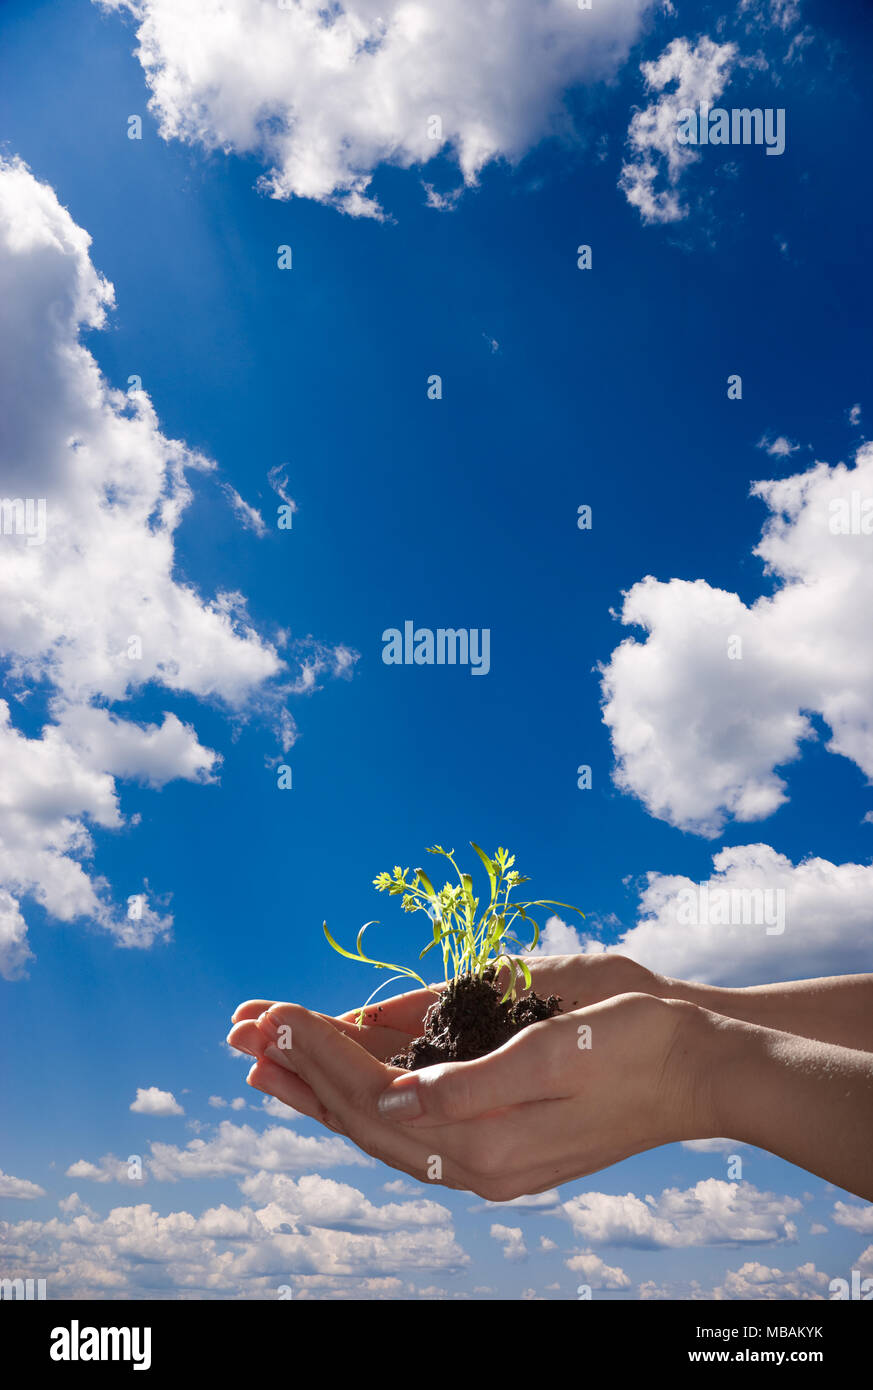 Hands holding green shoots on a sunny day, blue sky with cumulus clouds in background Stock Photo